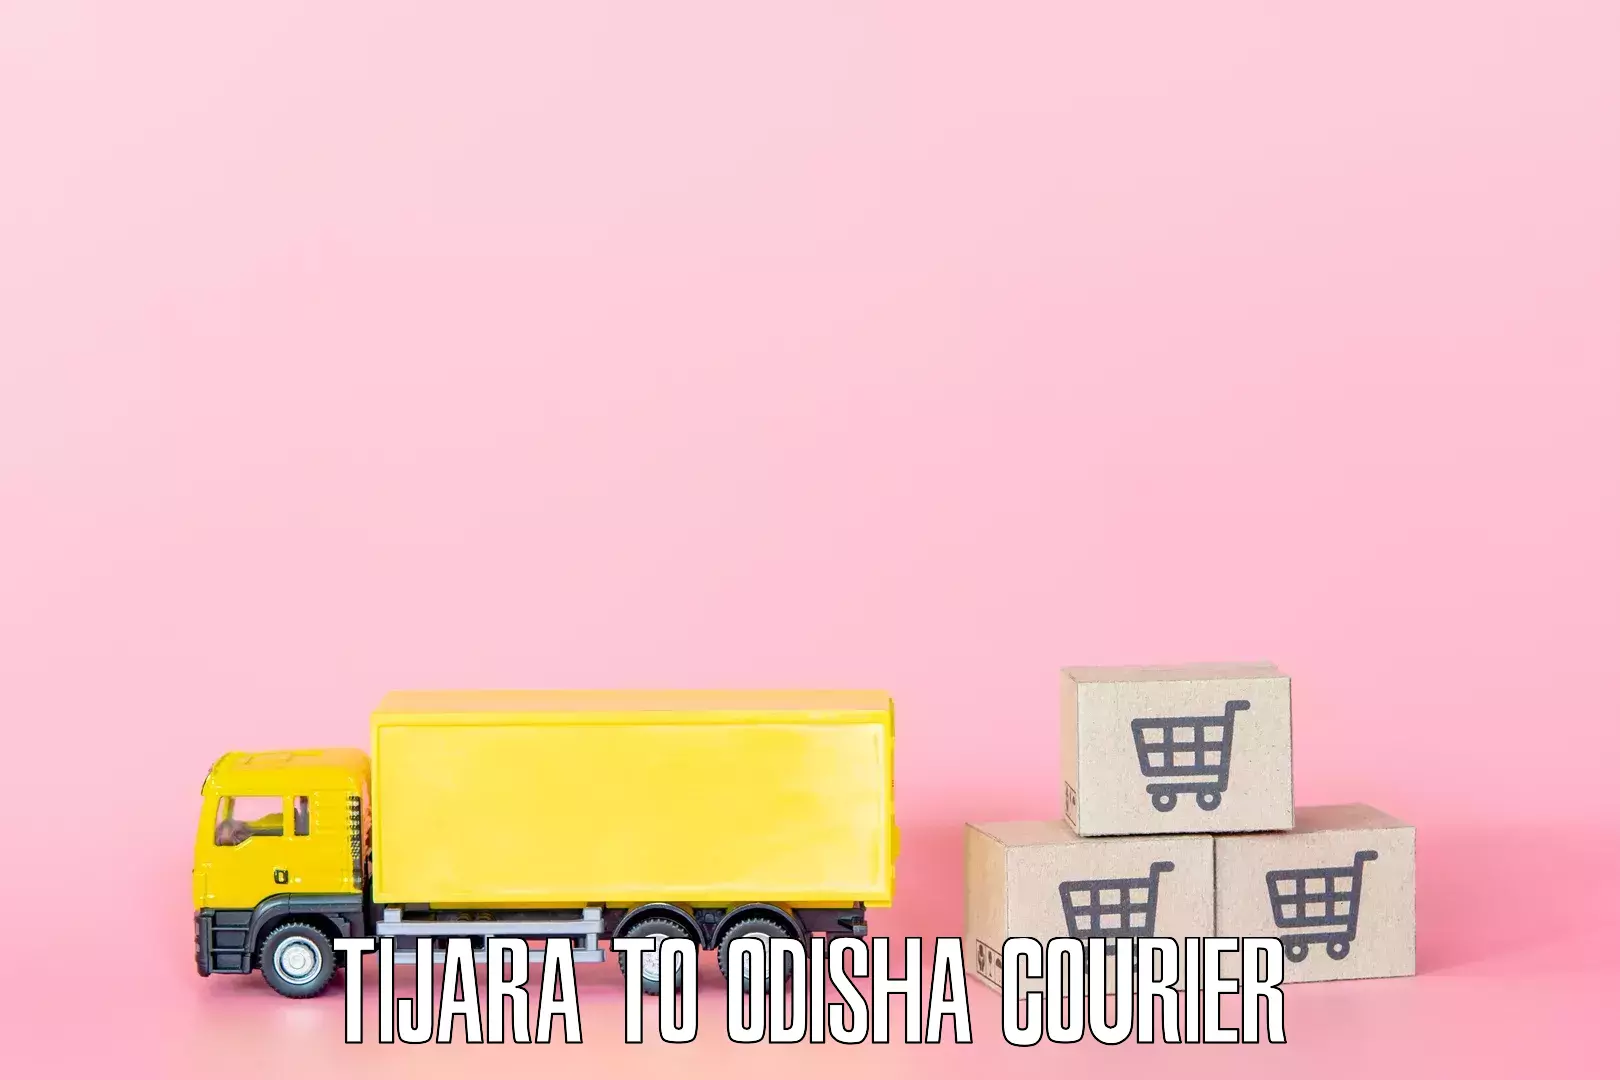 Affordable relocation services in Tijara to Duburi